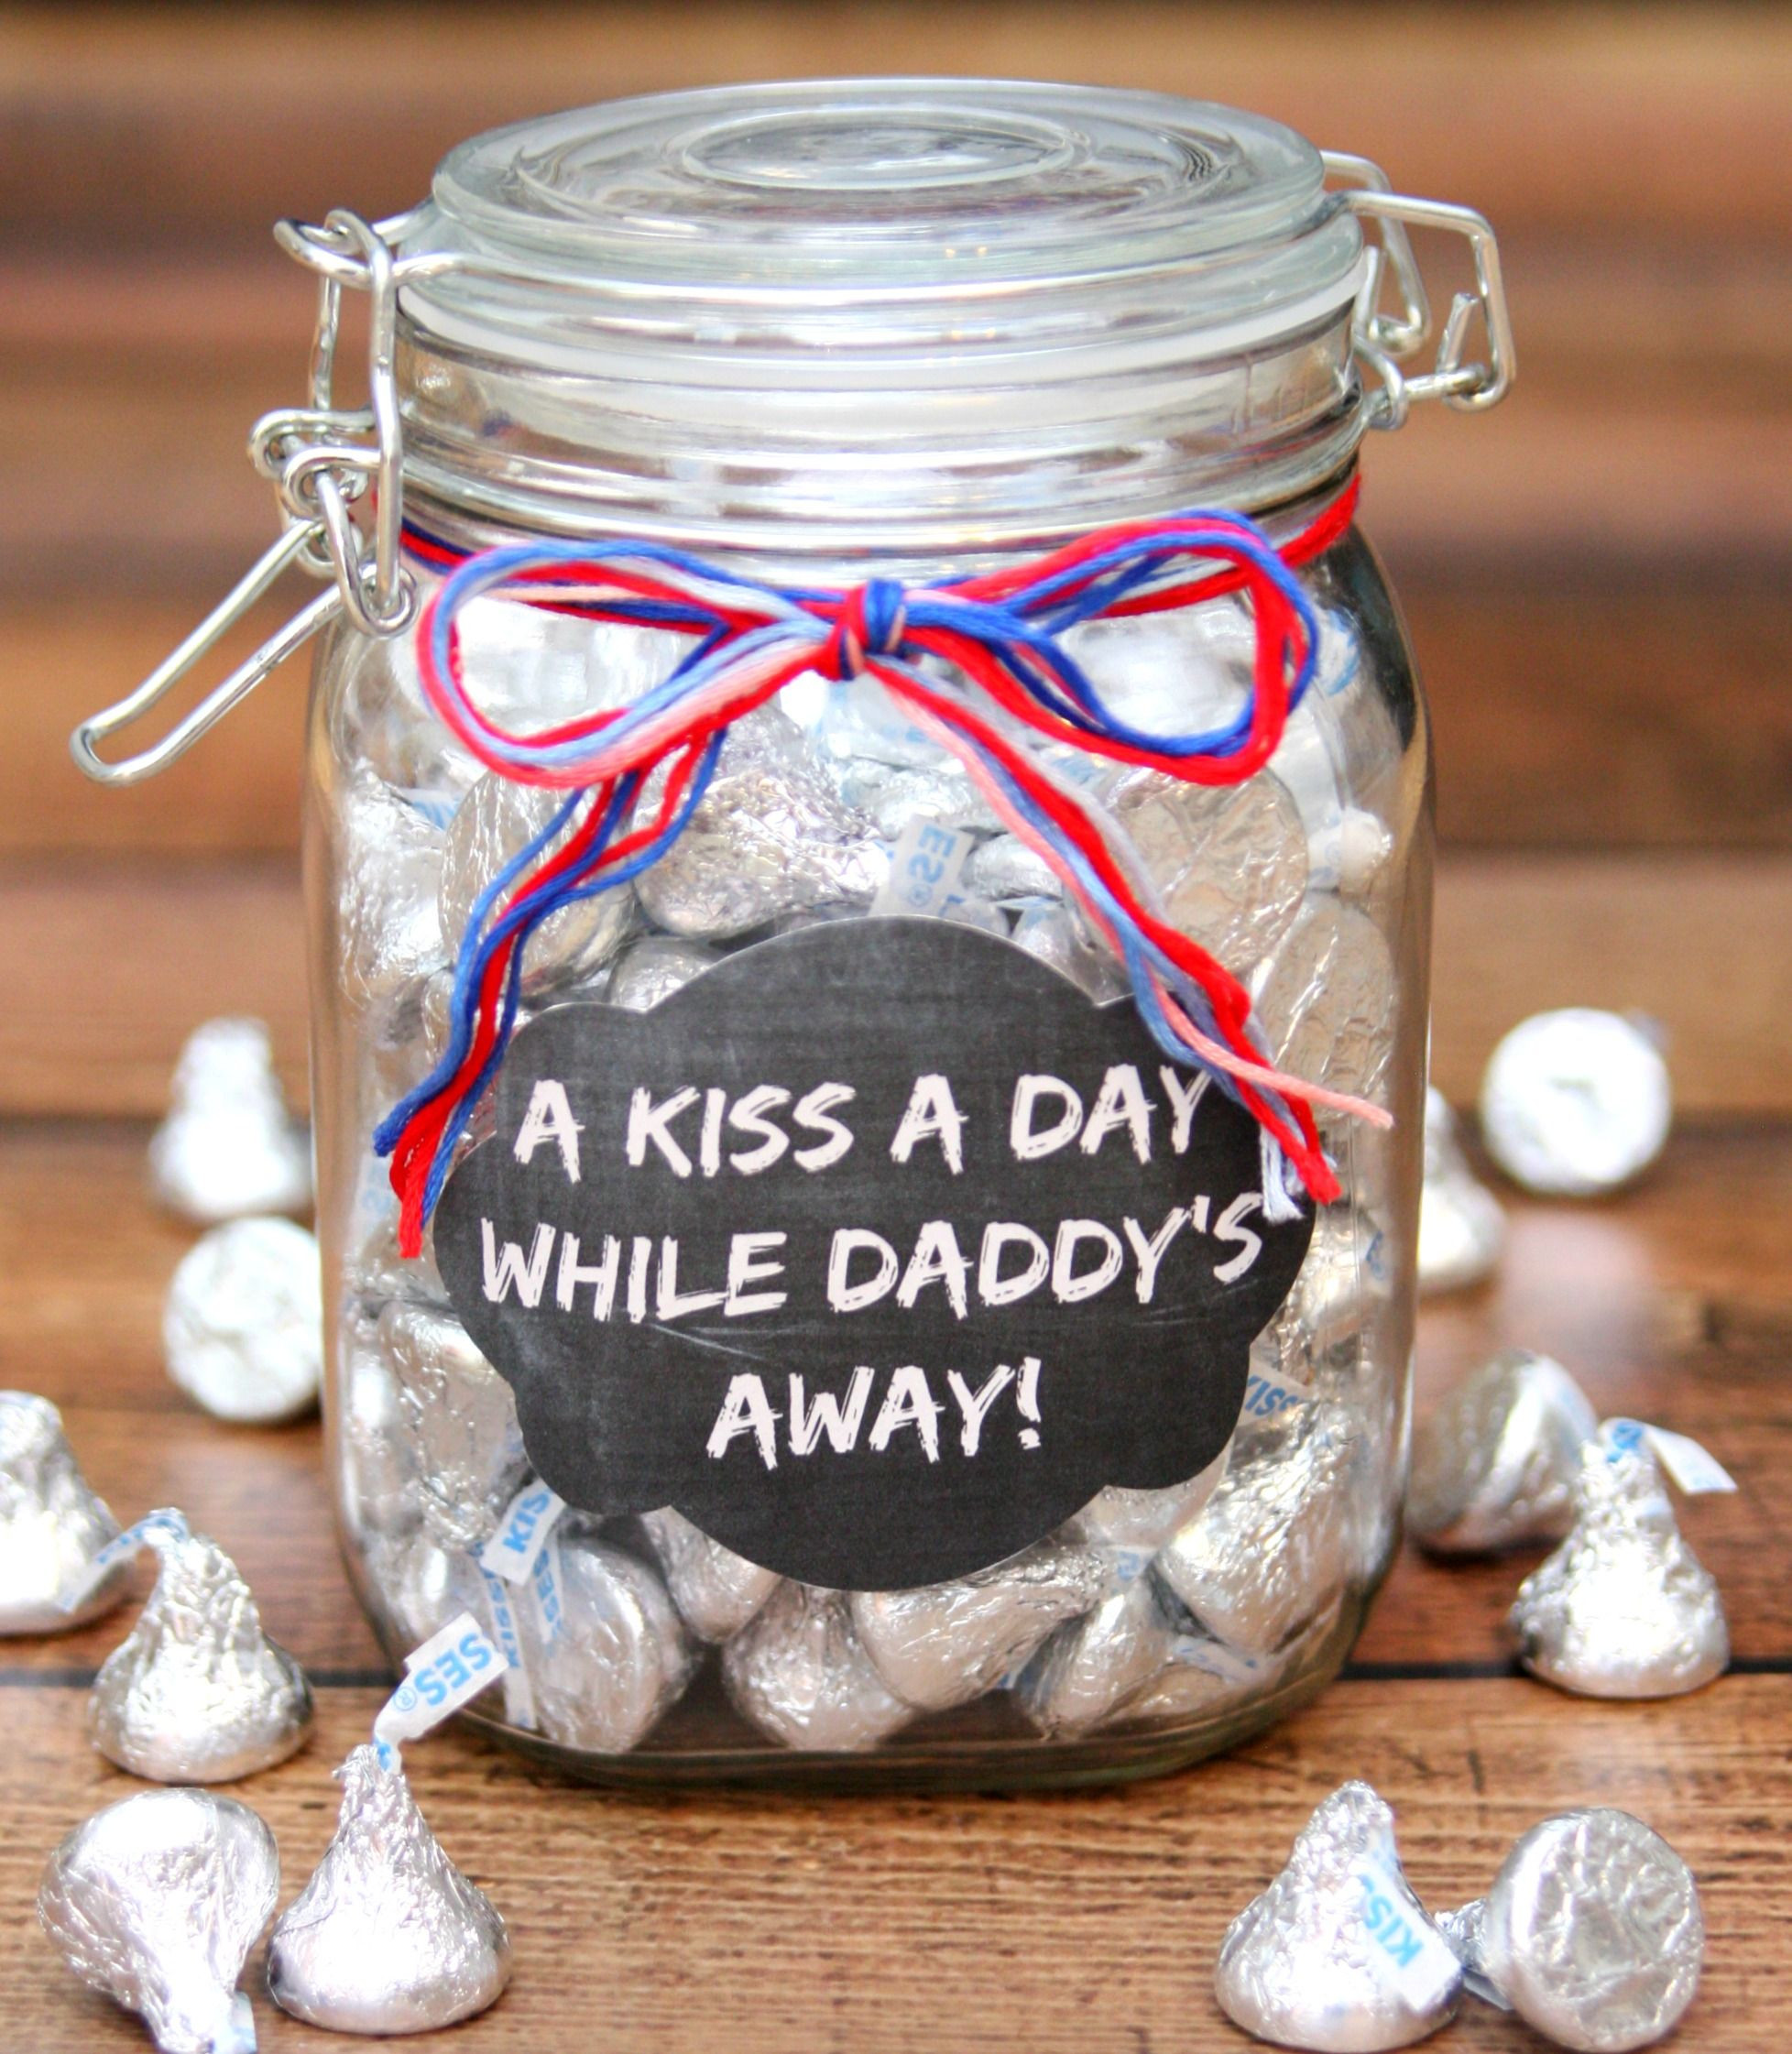 Deployment Gifts For Kids
 Our Deployment Jar – A Kiss A Day from Daddy